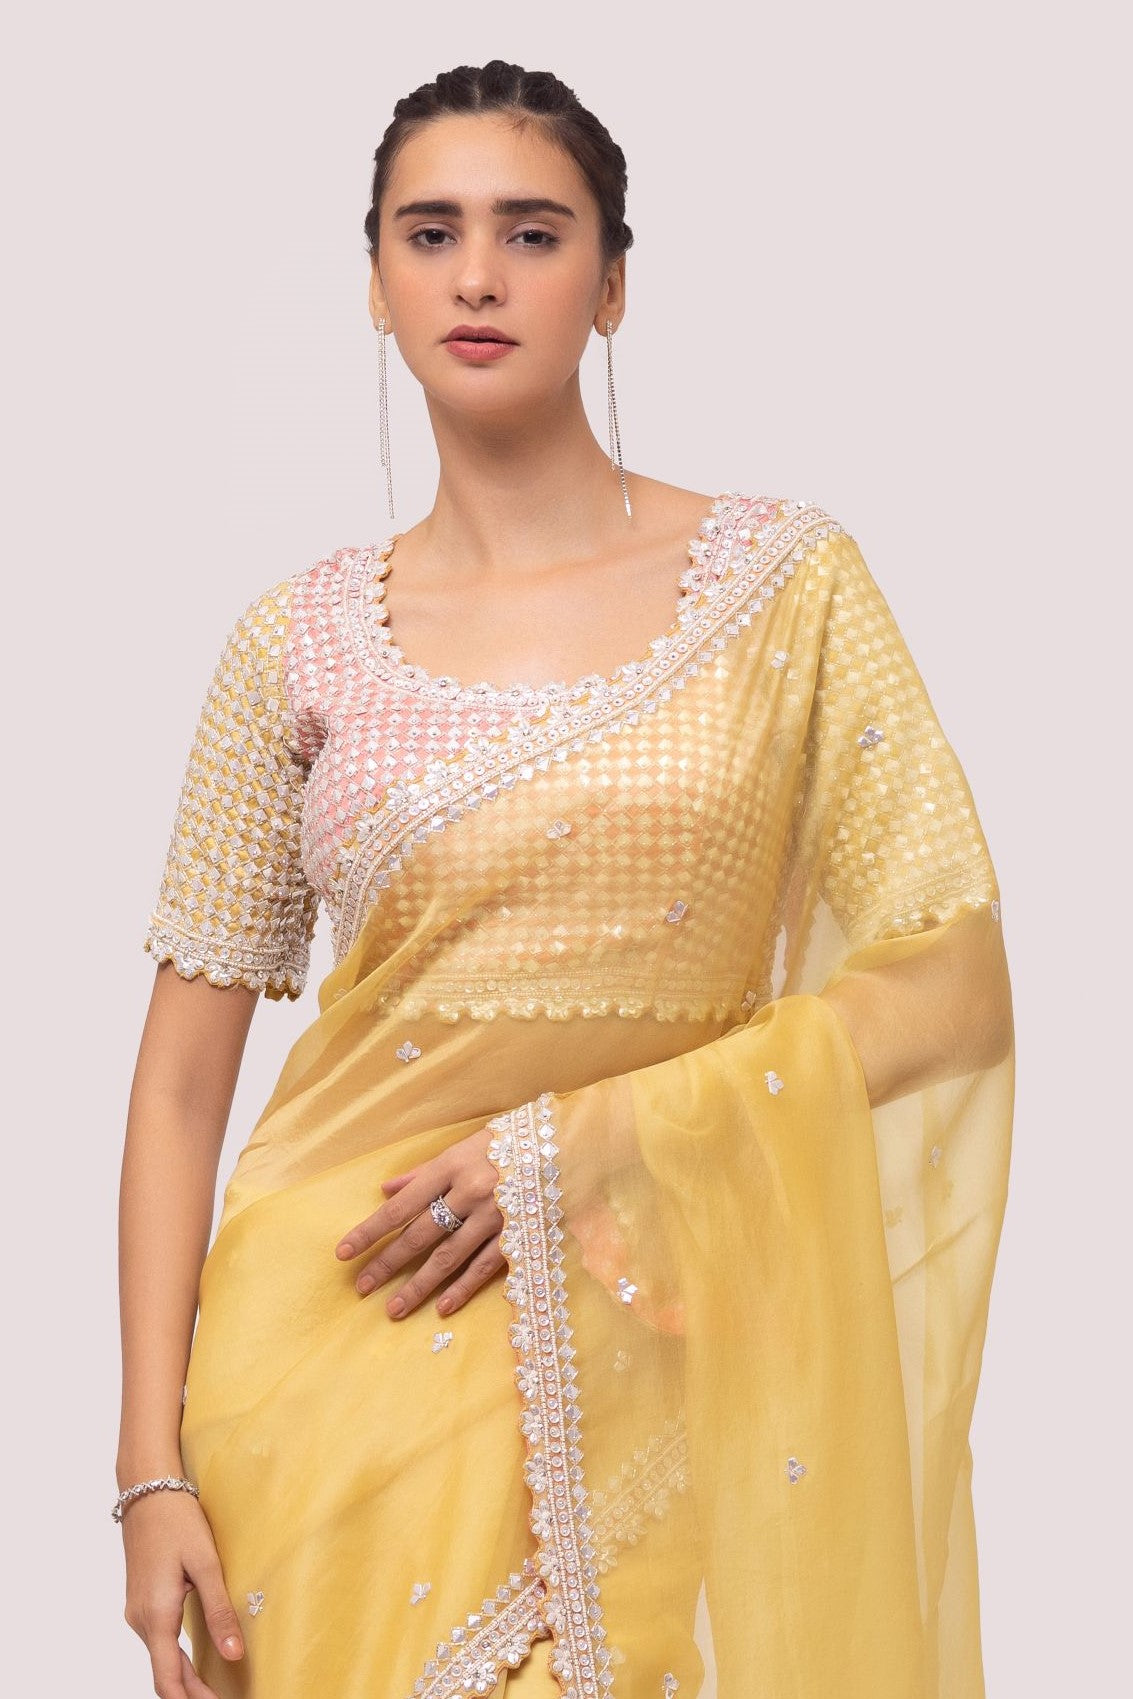 Shop yellow georgette saree with decorative edges featuring sequin work, and sequin embroidered blouse detailing is a perfect choice for parties! It comes with a designer saree blouse. Make a fashion statement at weddings with stunning designer sarees, embroidered sarees with blouses, wedding sarees, and handloom sarees from Pure Elegance Indian fashion store in the USA.